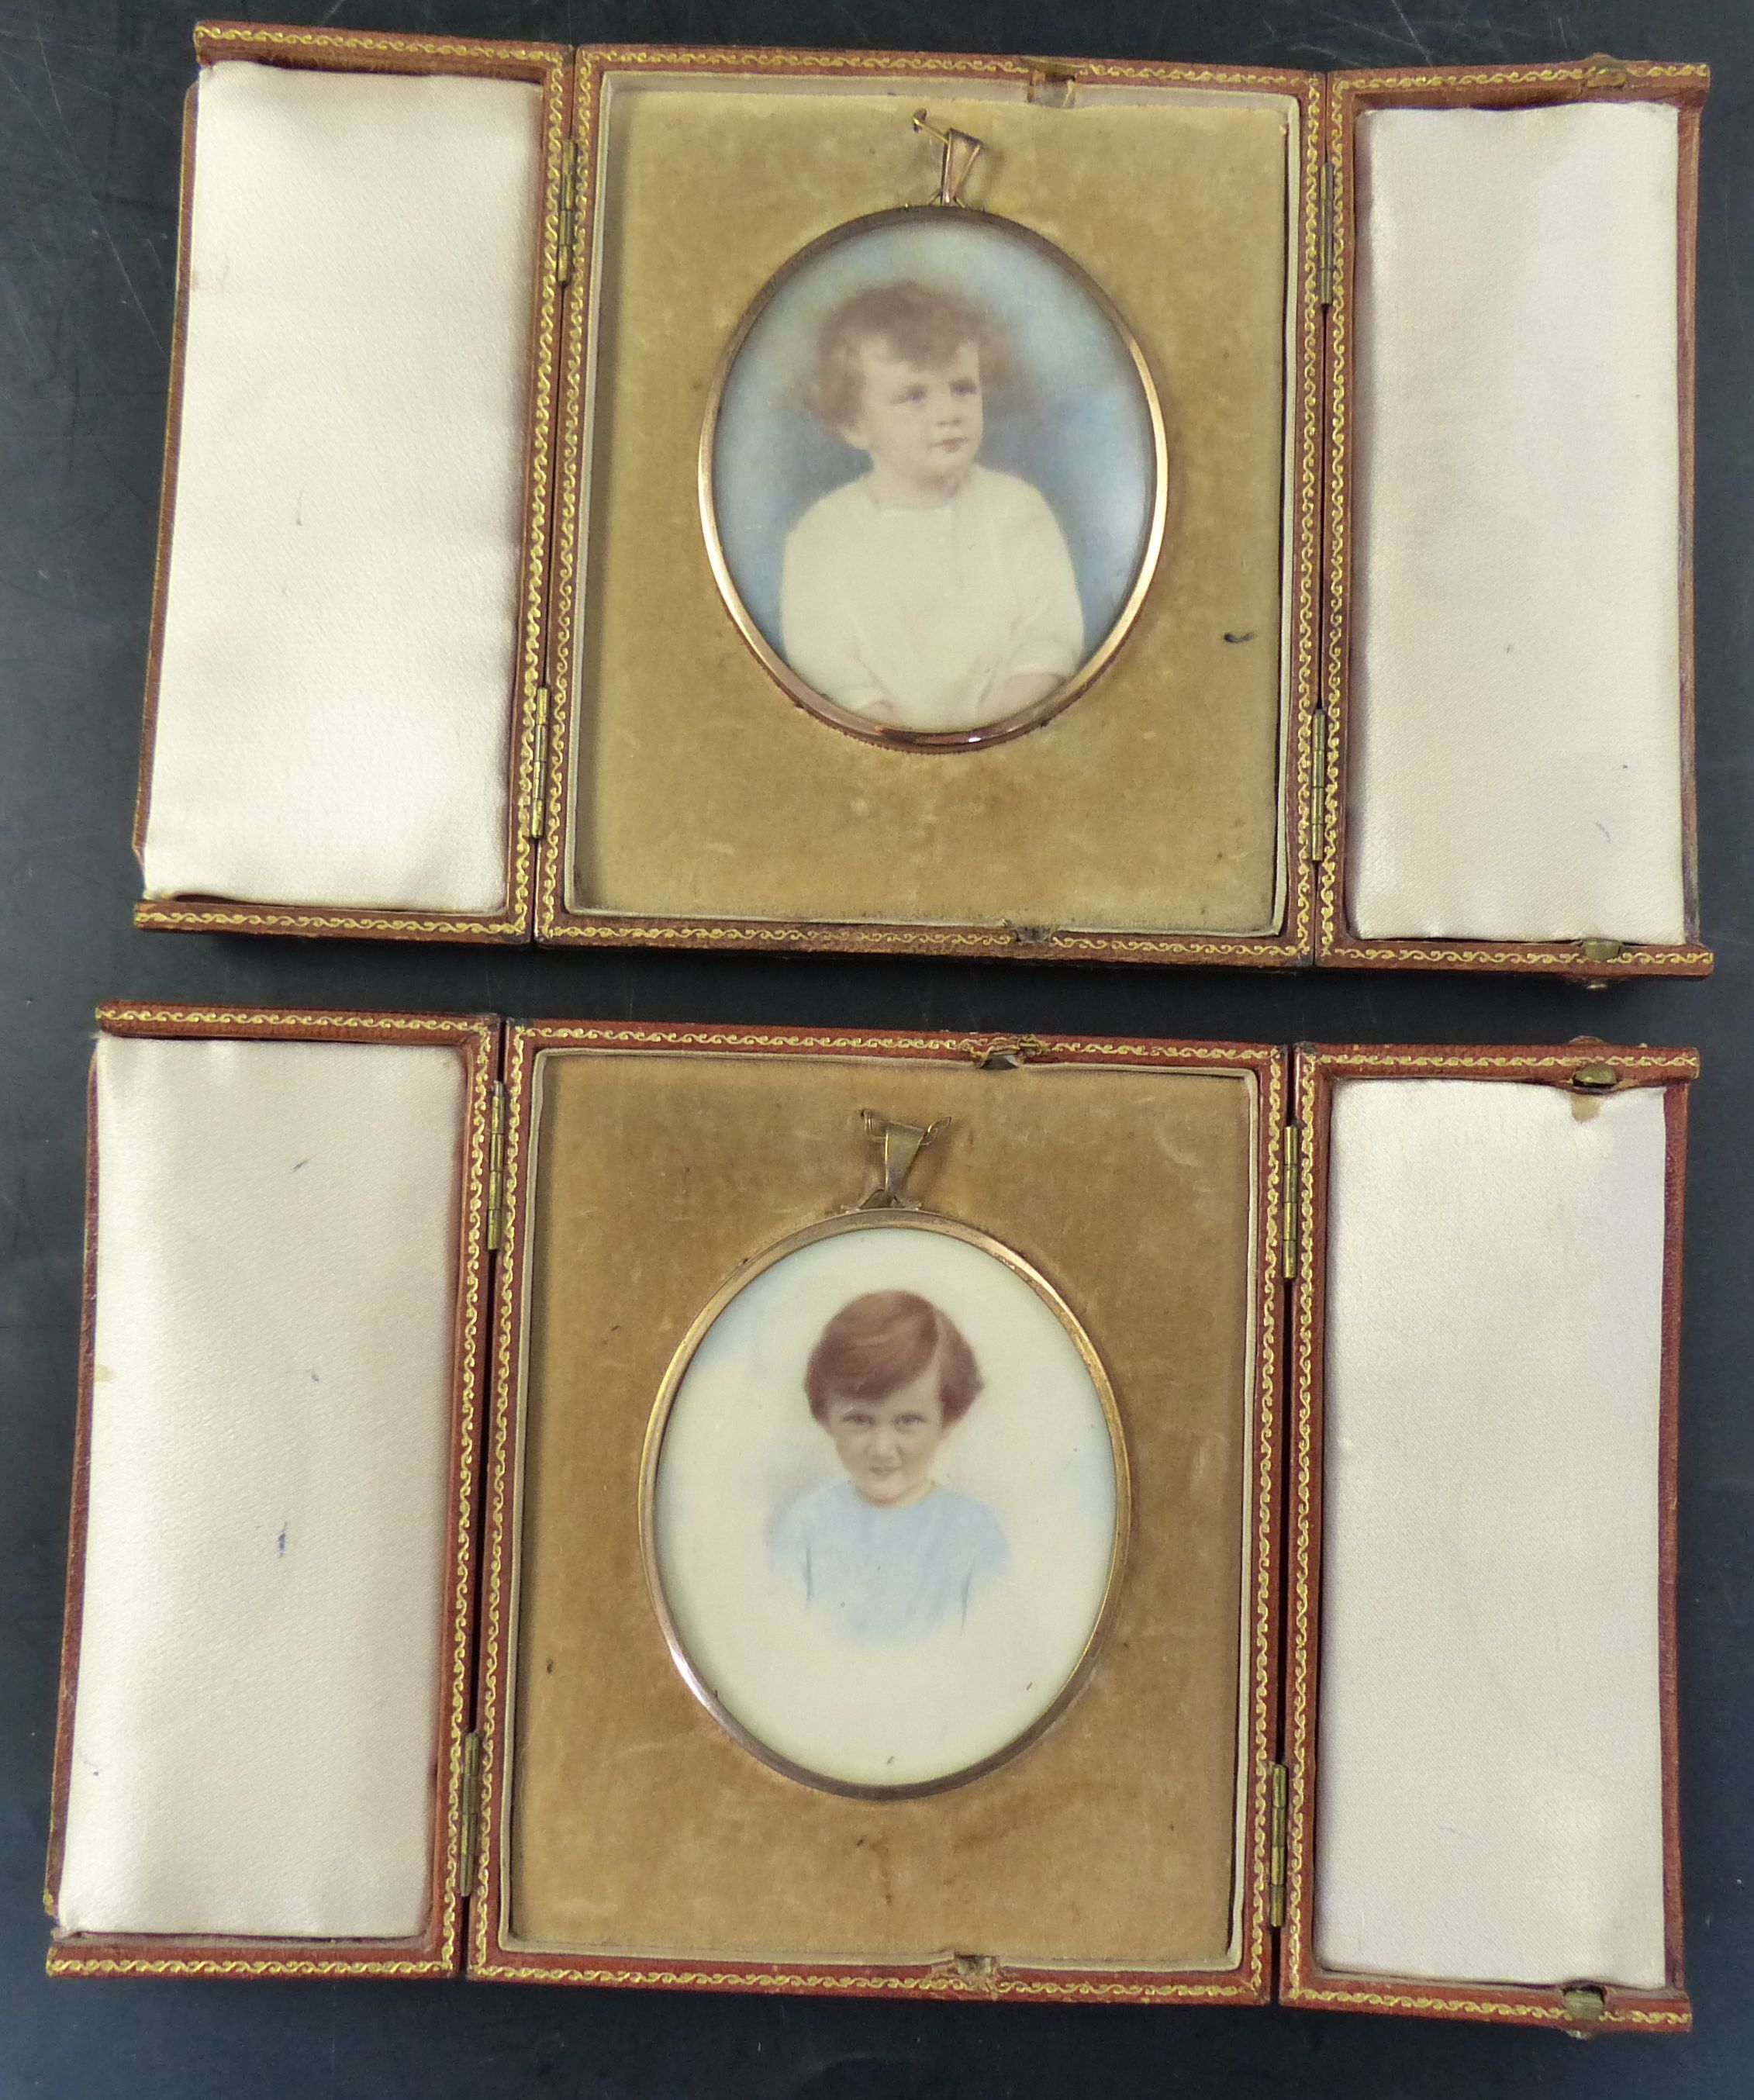 Two colour tinted miniature photographs of an infant boy and girl, cased and a collection of Asian gilt lacquer boxes and animal figure